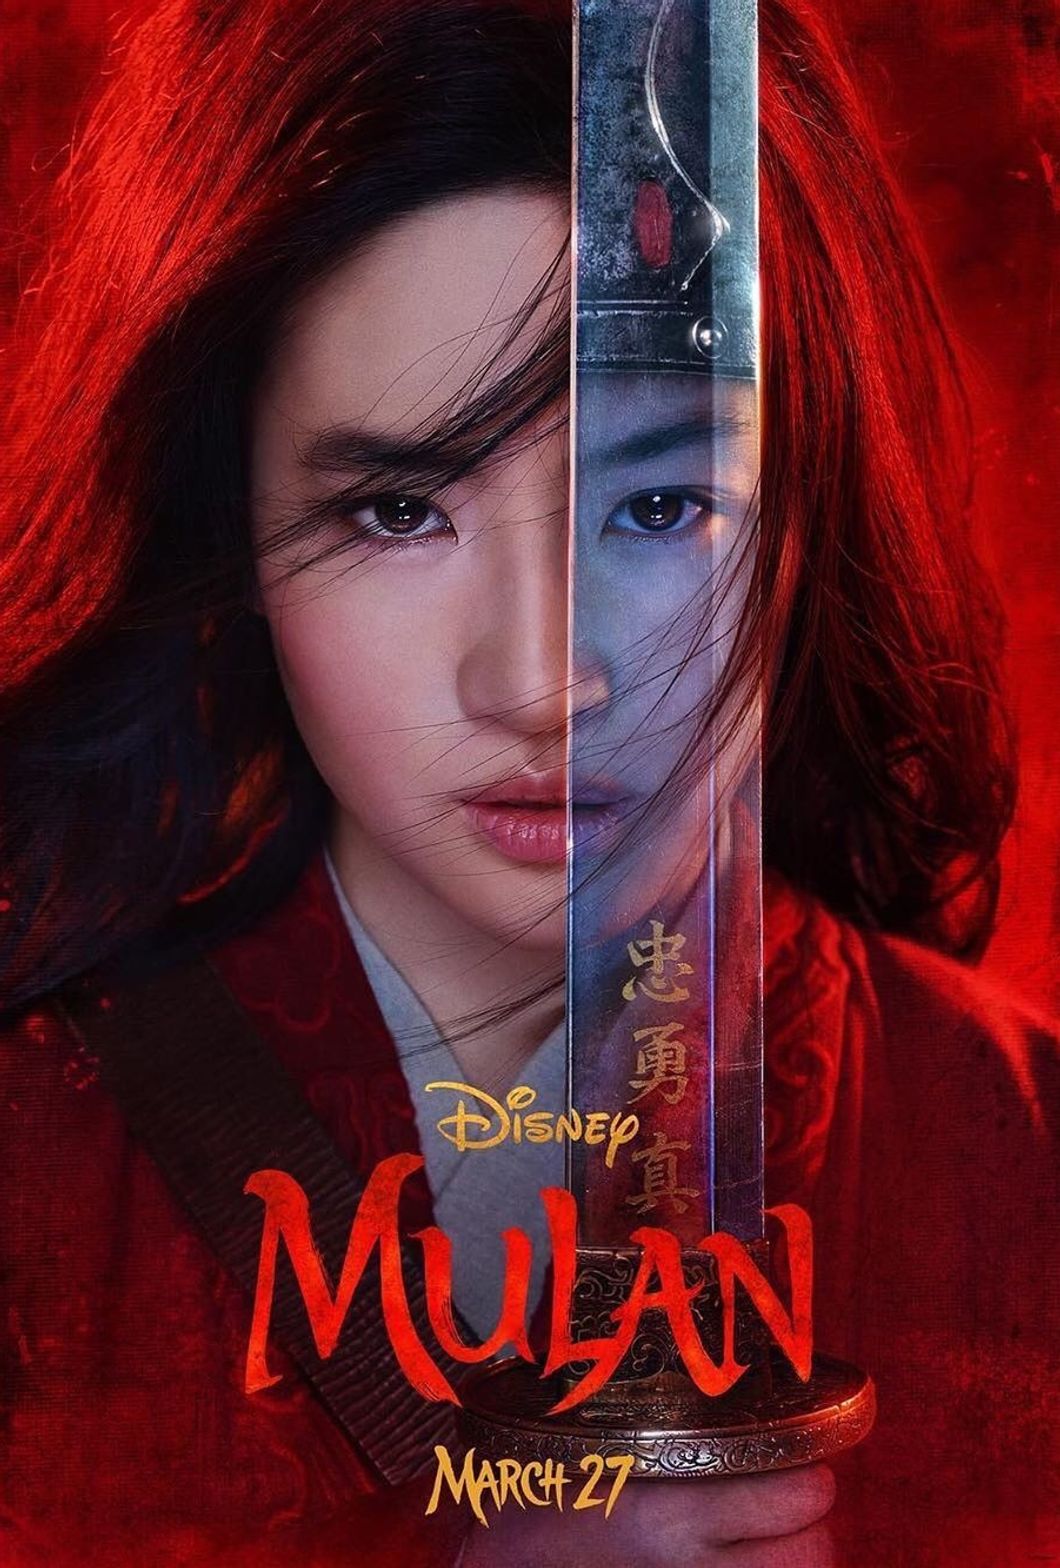 ​Mulan (2020)​ Was Released on Disney+, And Here’s What I Think